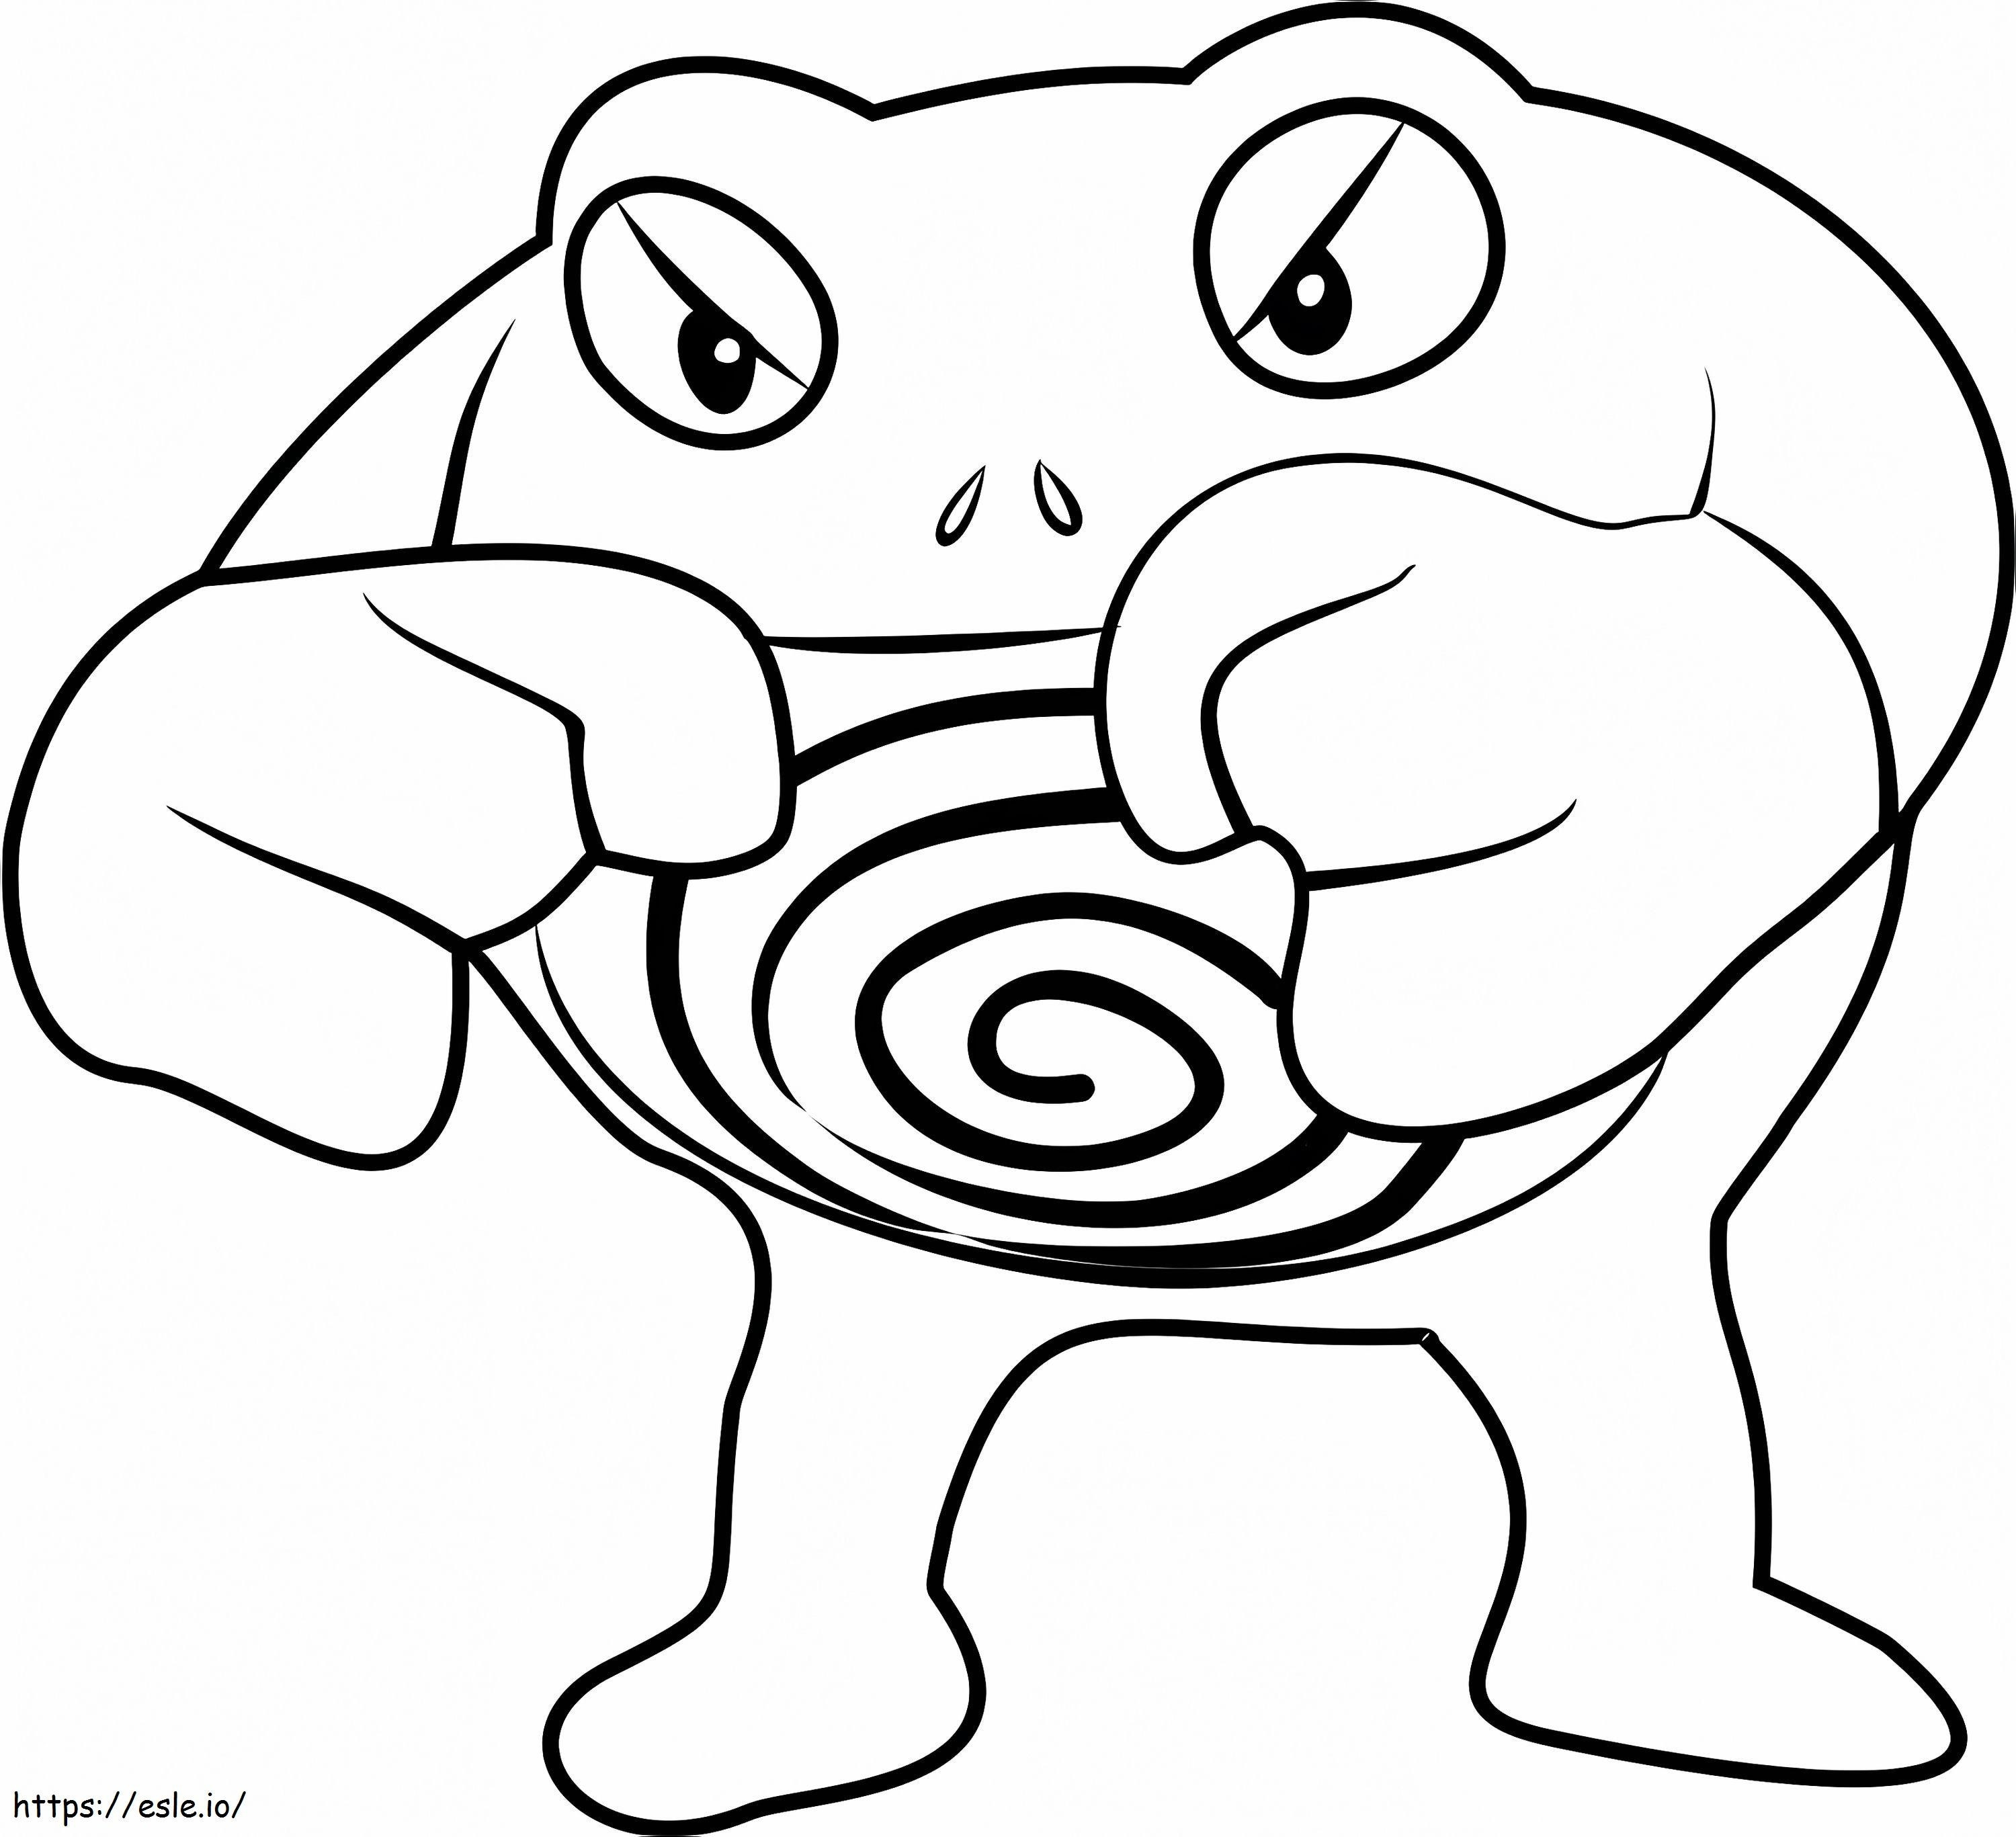 1530844705 Poliwrath Pokemon Go A4 coloring page